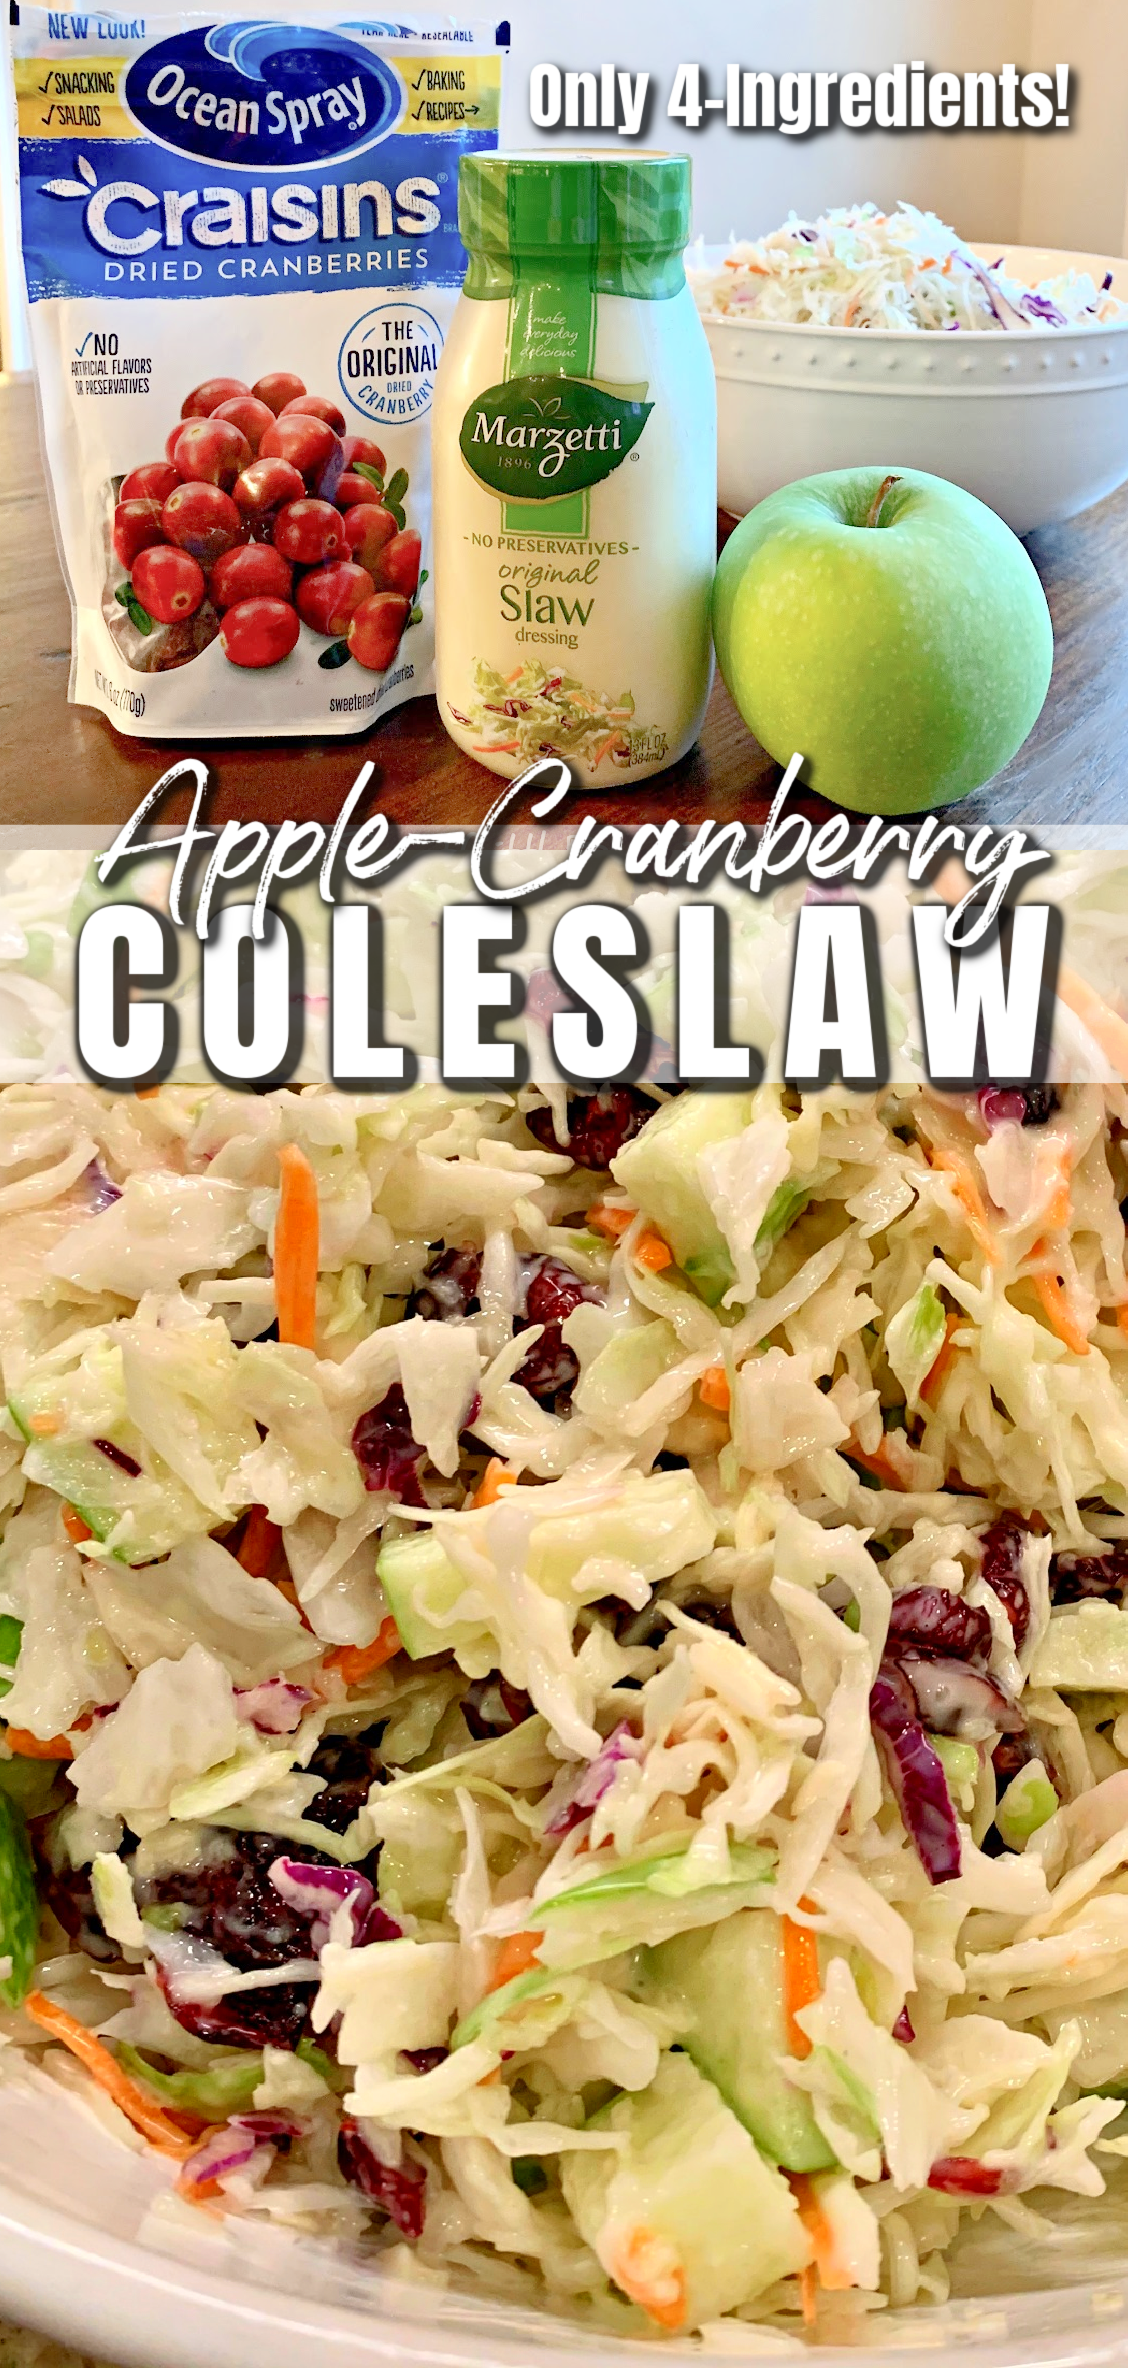 This is a 2 image collage showing the ingredients to make the coleslaw - the top photo shows a bowl filled with coleslaw, a bag of dried cranberries, a bottle of Marzetti Original Slaw dressing and a granny smith apple. The bottom photo shows the Apple Cranberry Coleslaw in a white bowl.